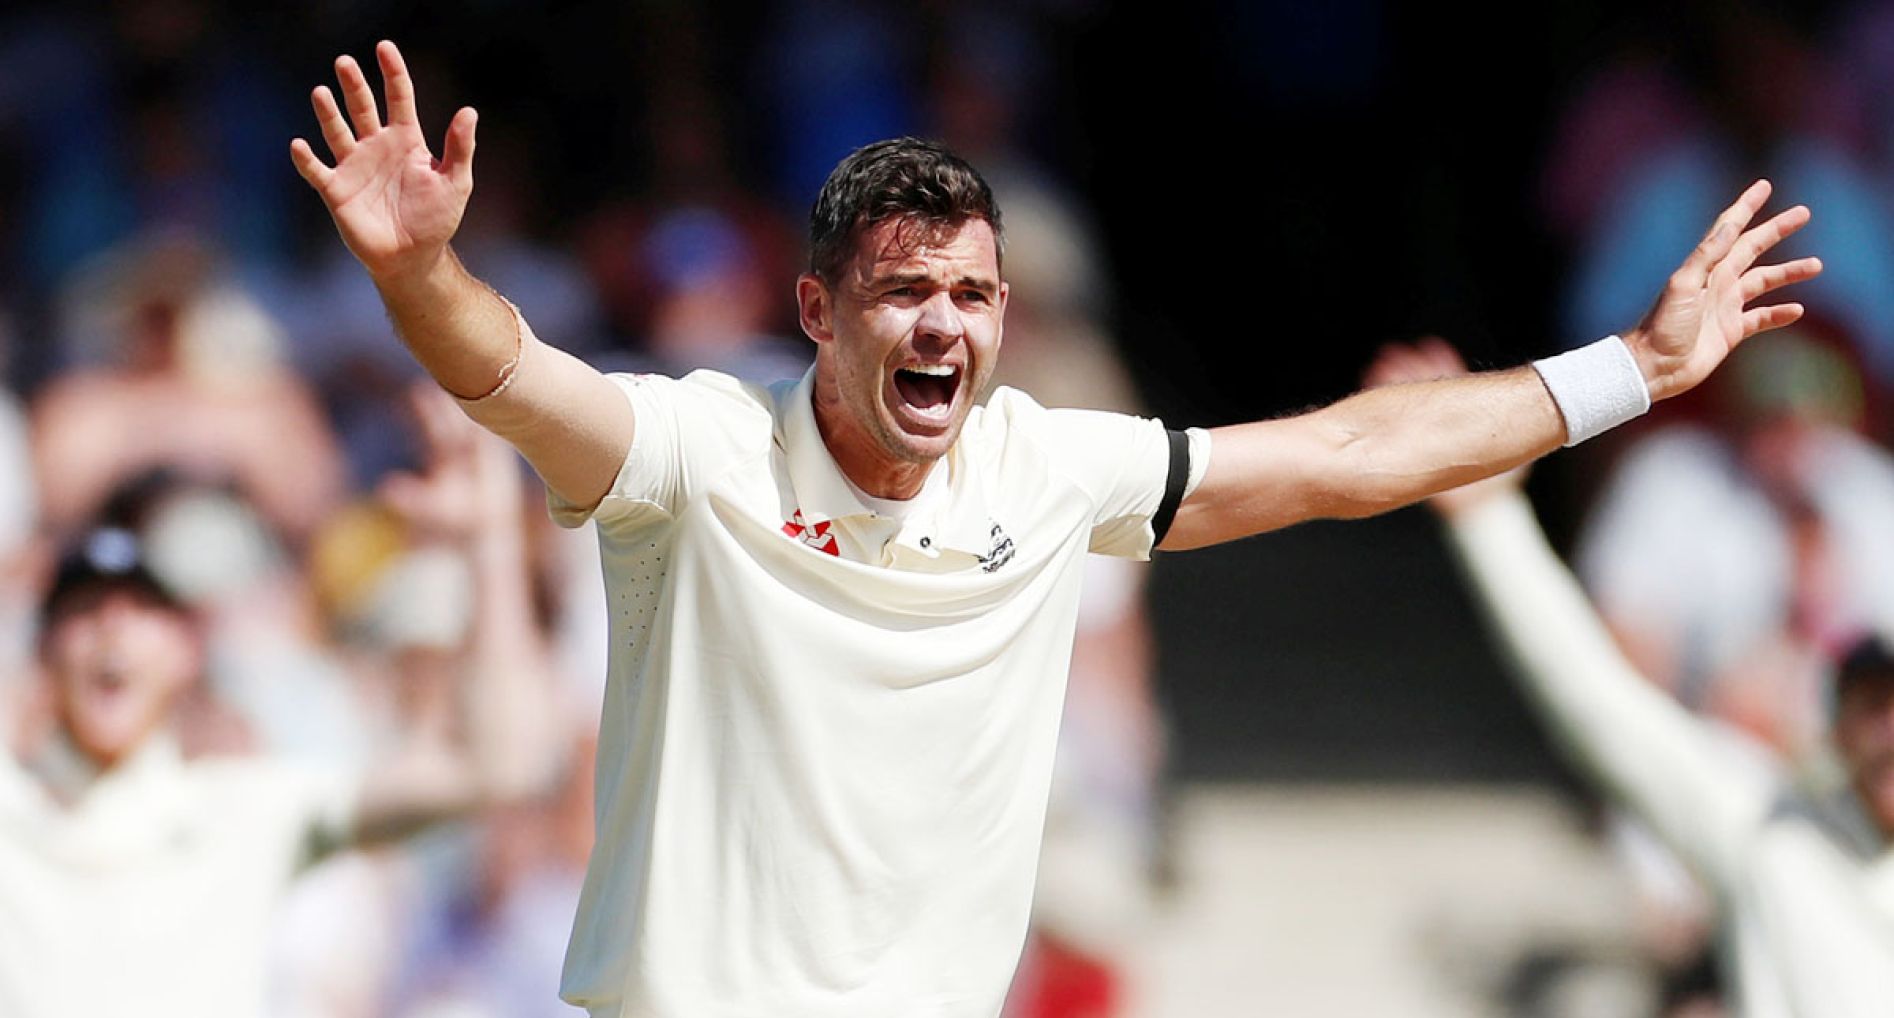 Never imagined in a million years: James Anderson on becoming most-capped English Test player